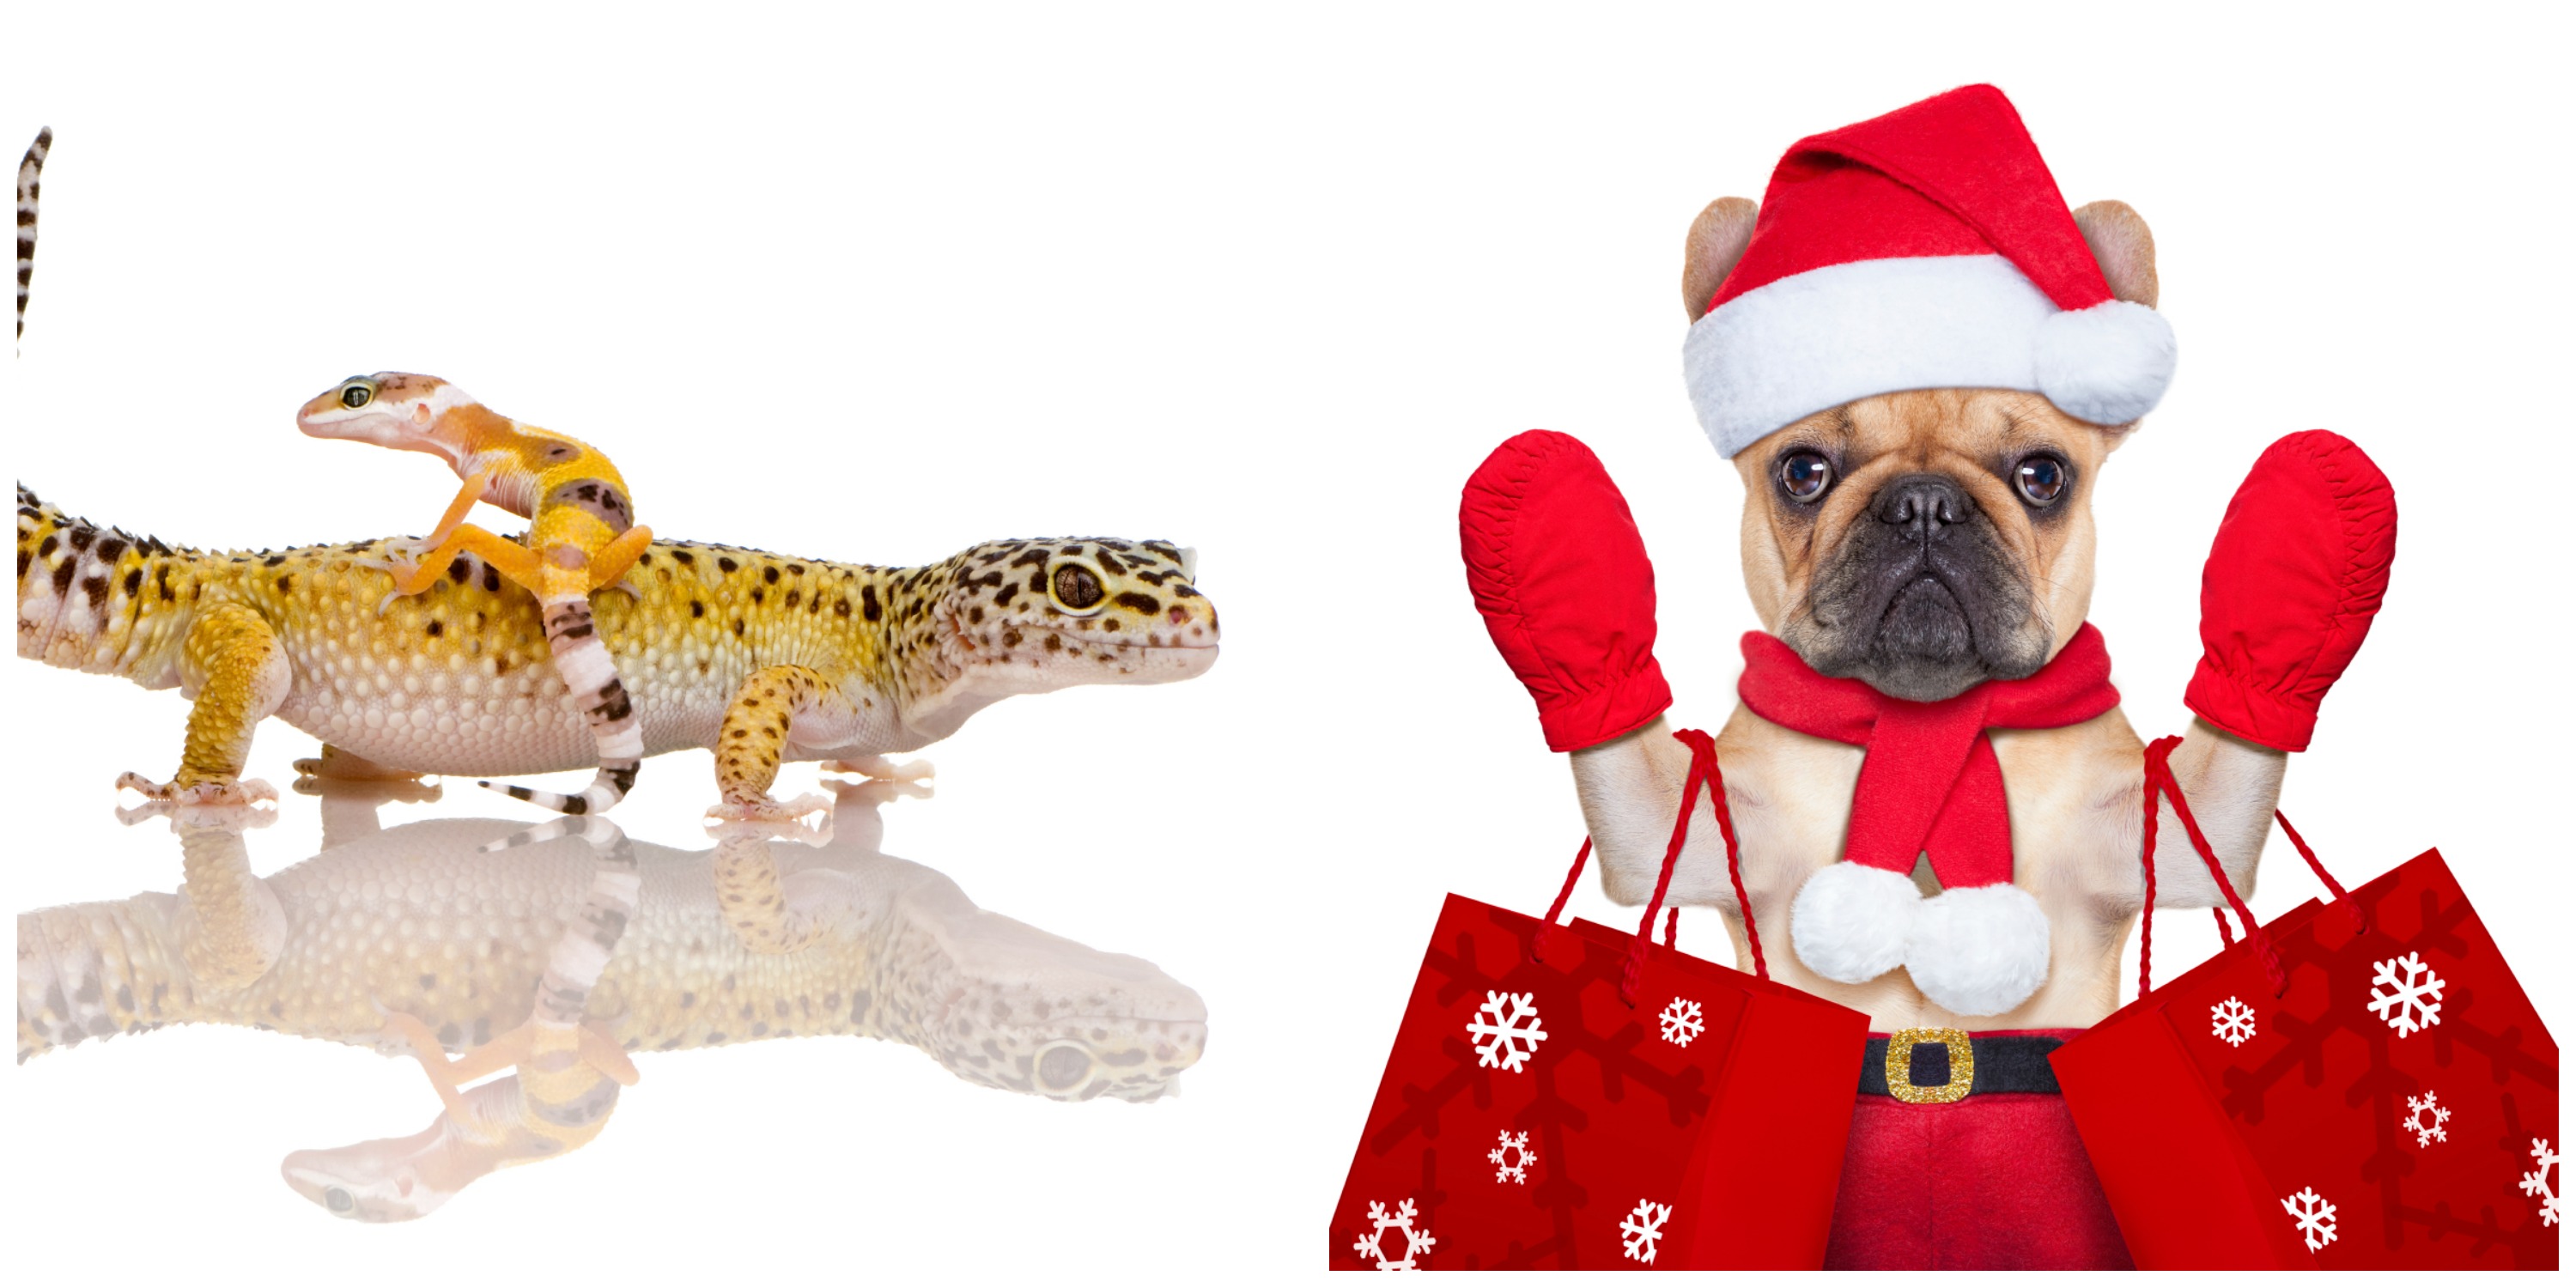 Reptile or Paw?…  Canadian Pet Expo, Woofstock held on same weekend  –  November 20 & 21, 2015